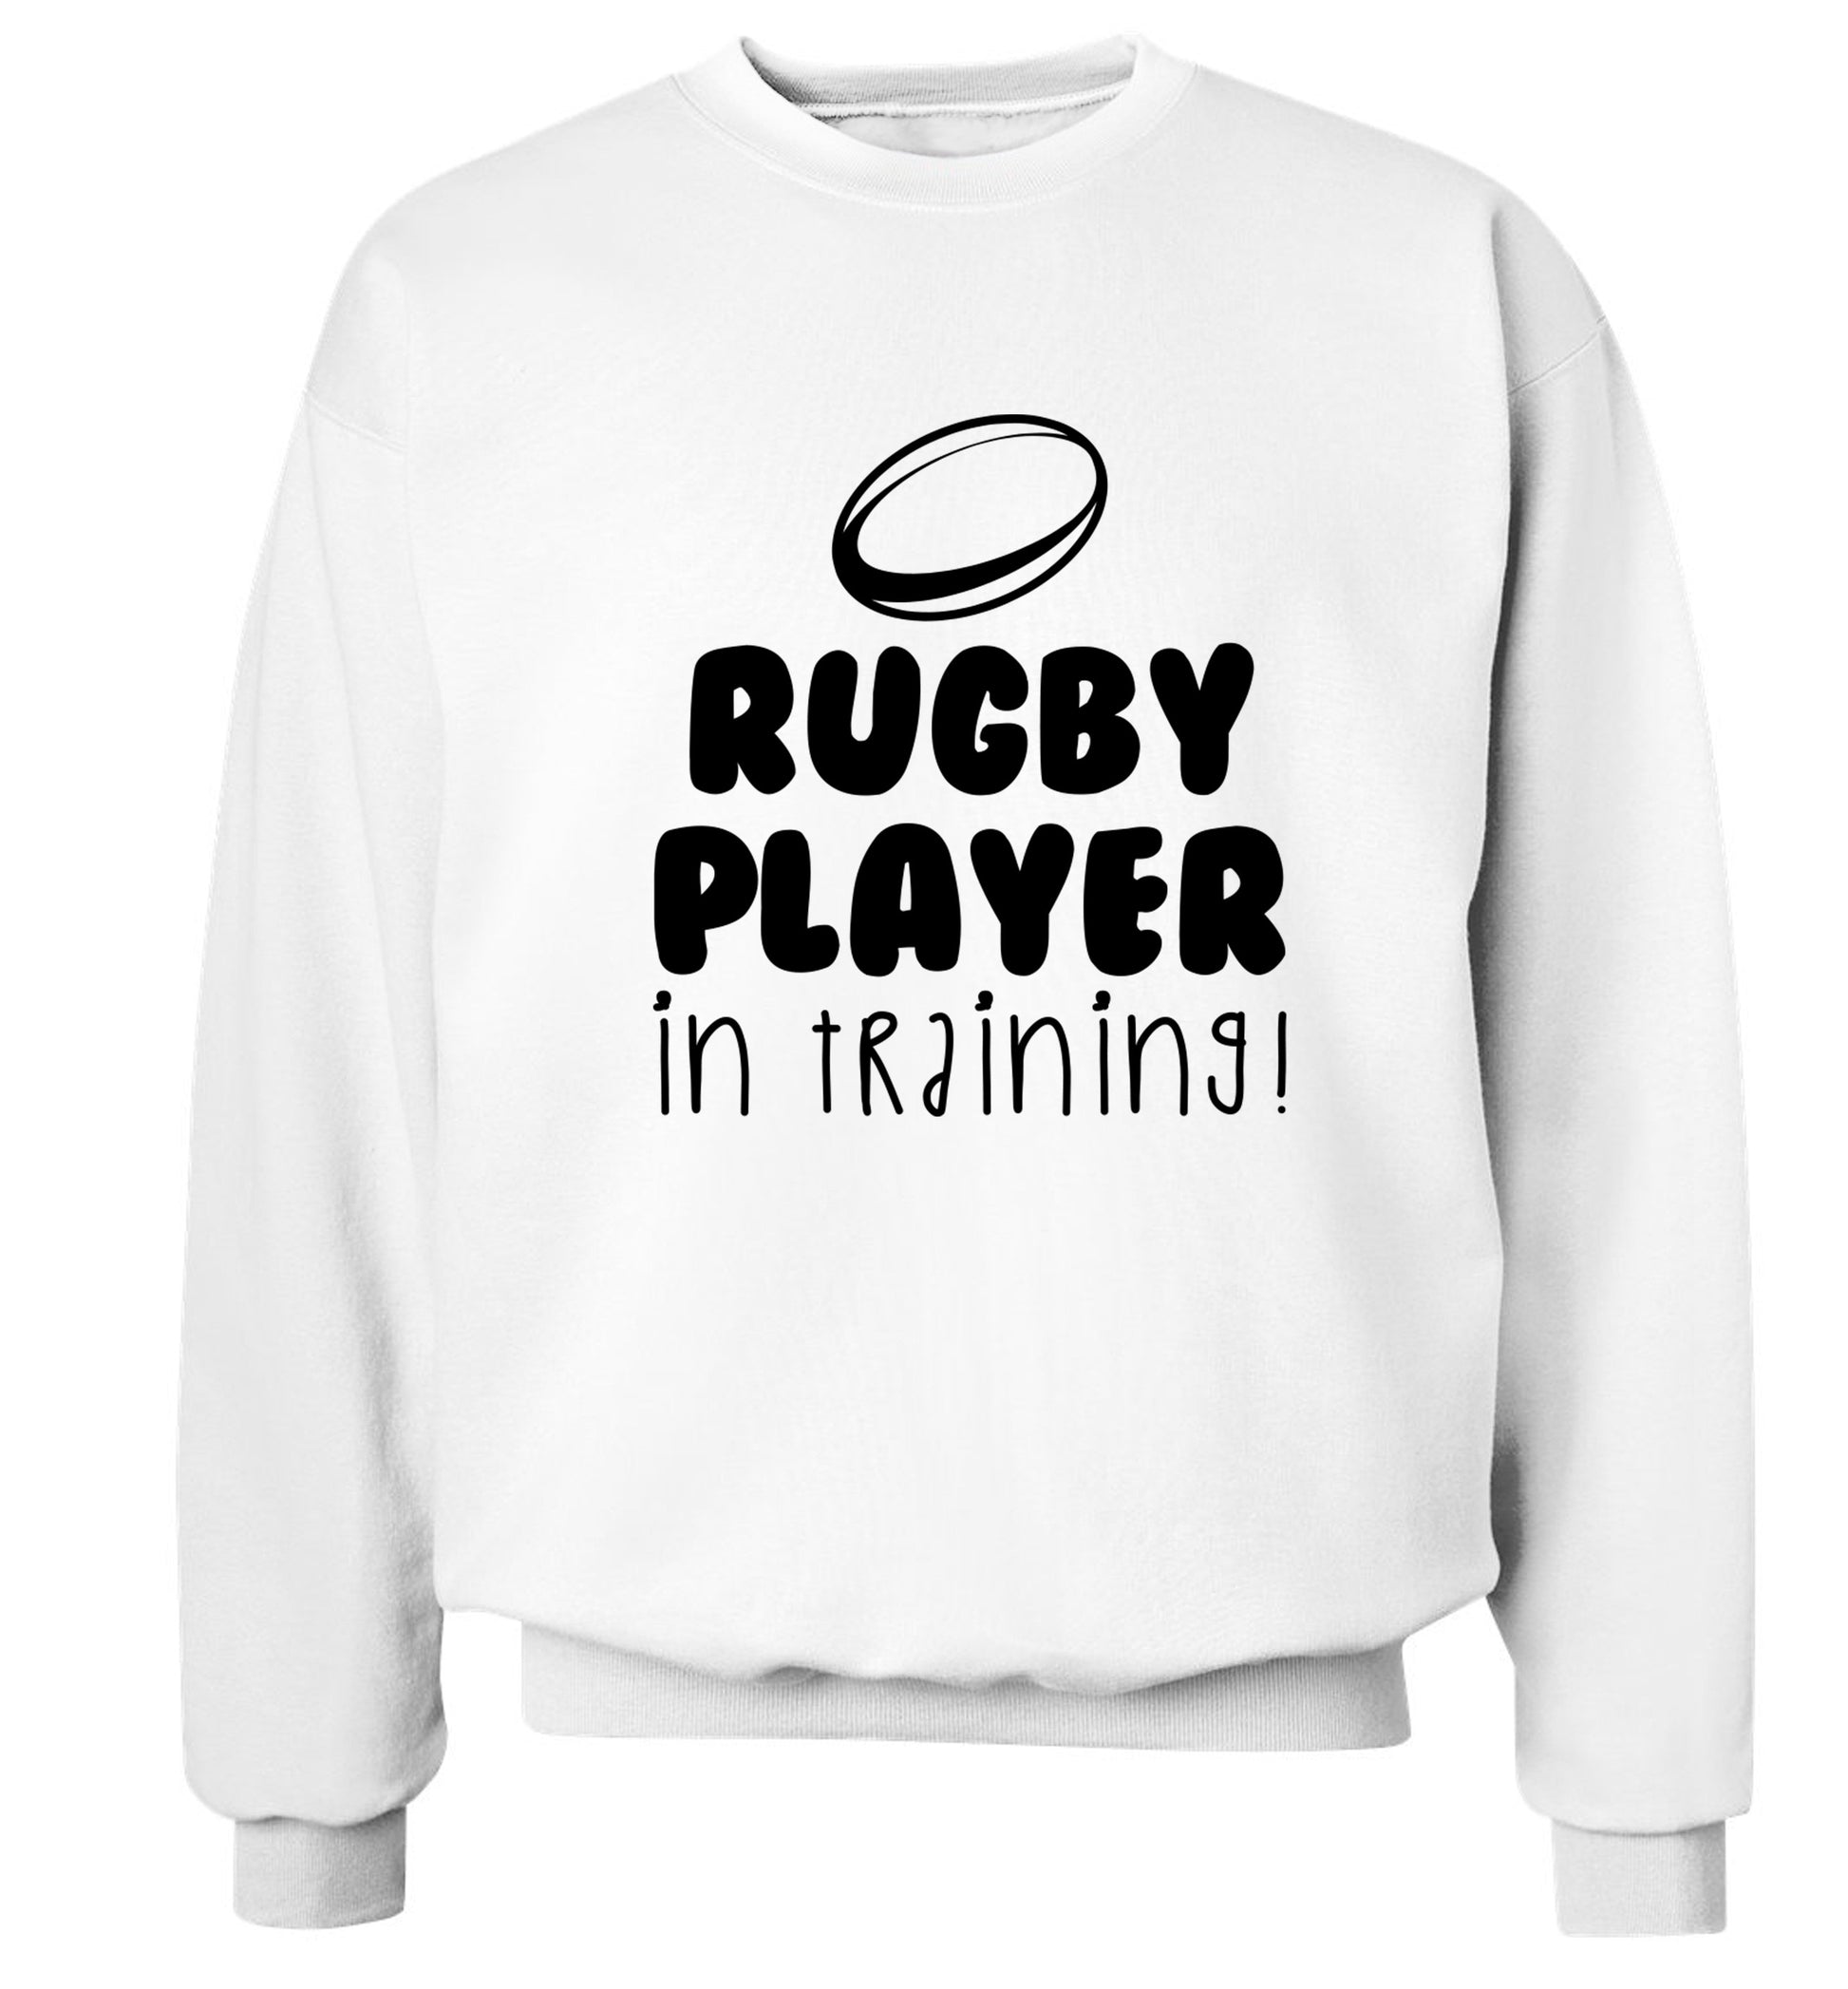 Rugby player in training Adult's unisex white Sweater 2XL